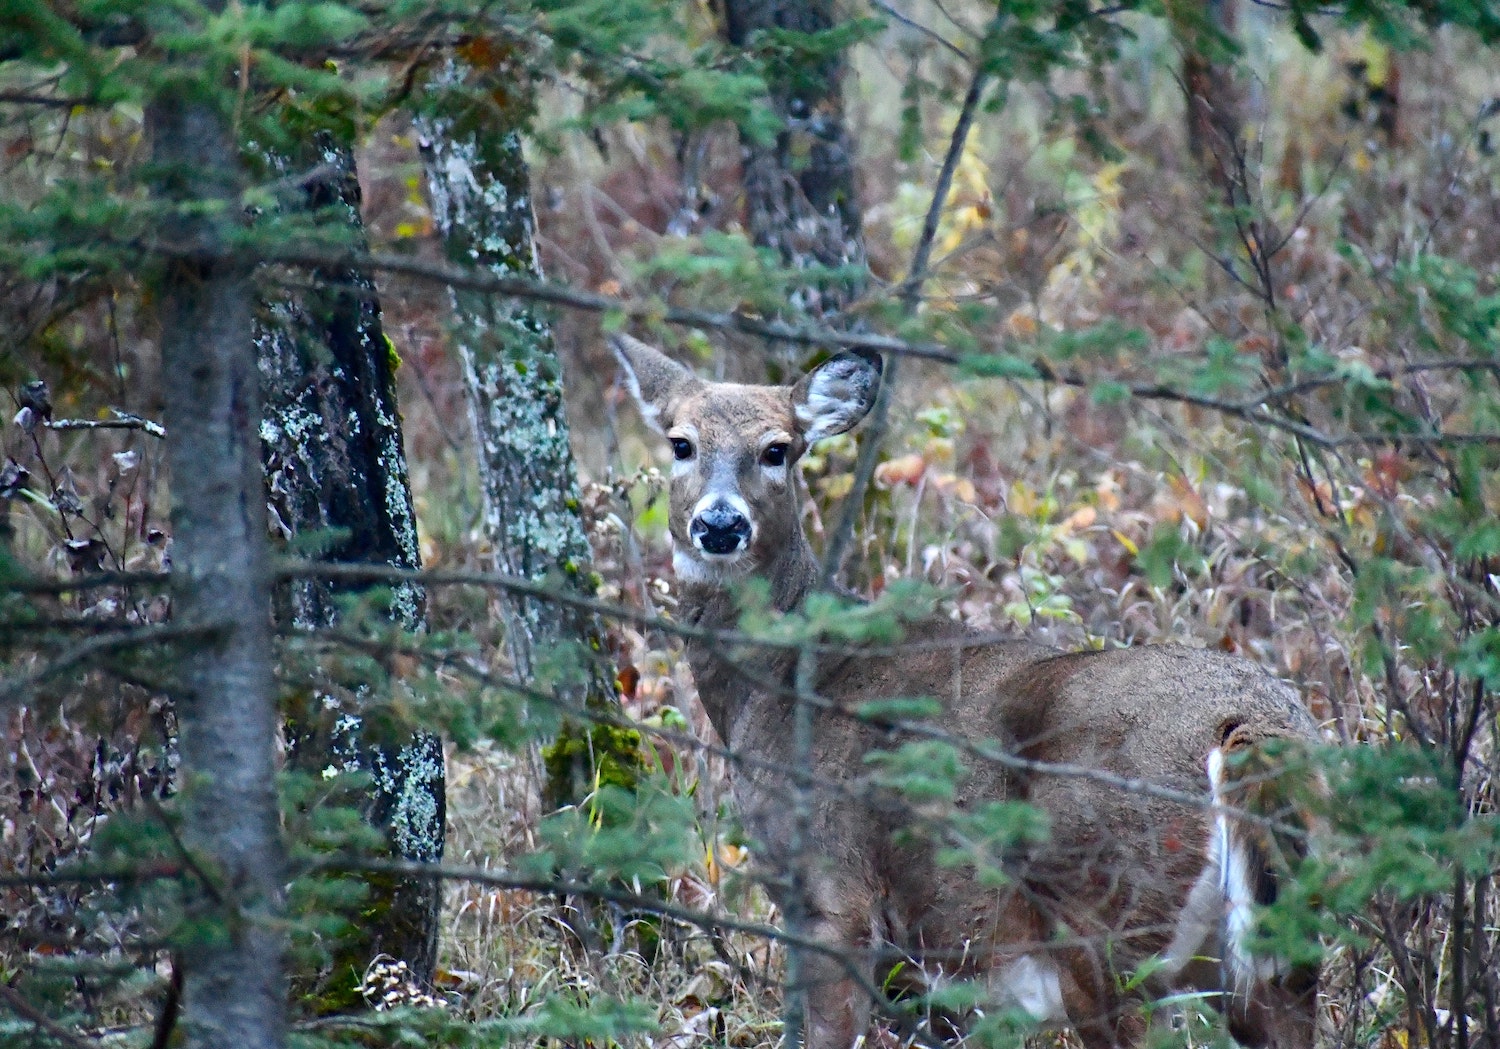 A whitetail deer in the woods.